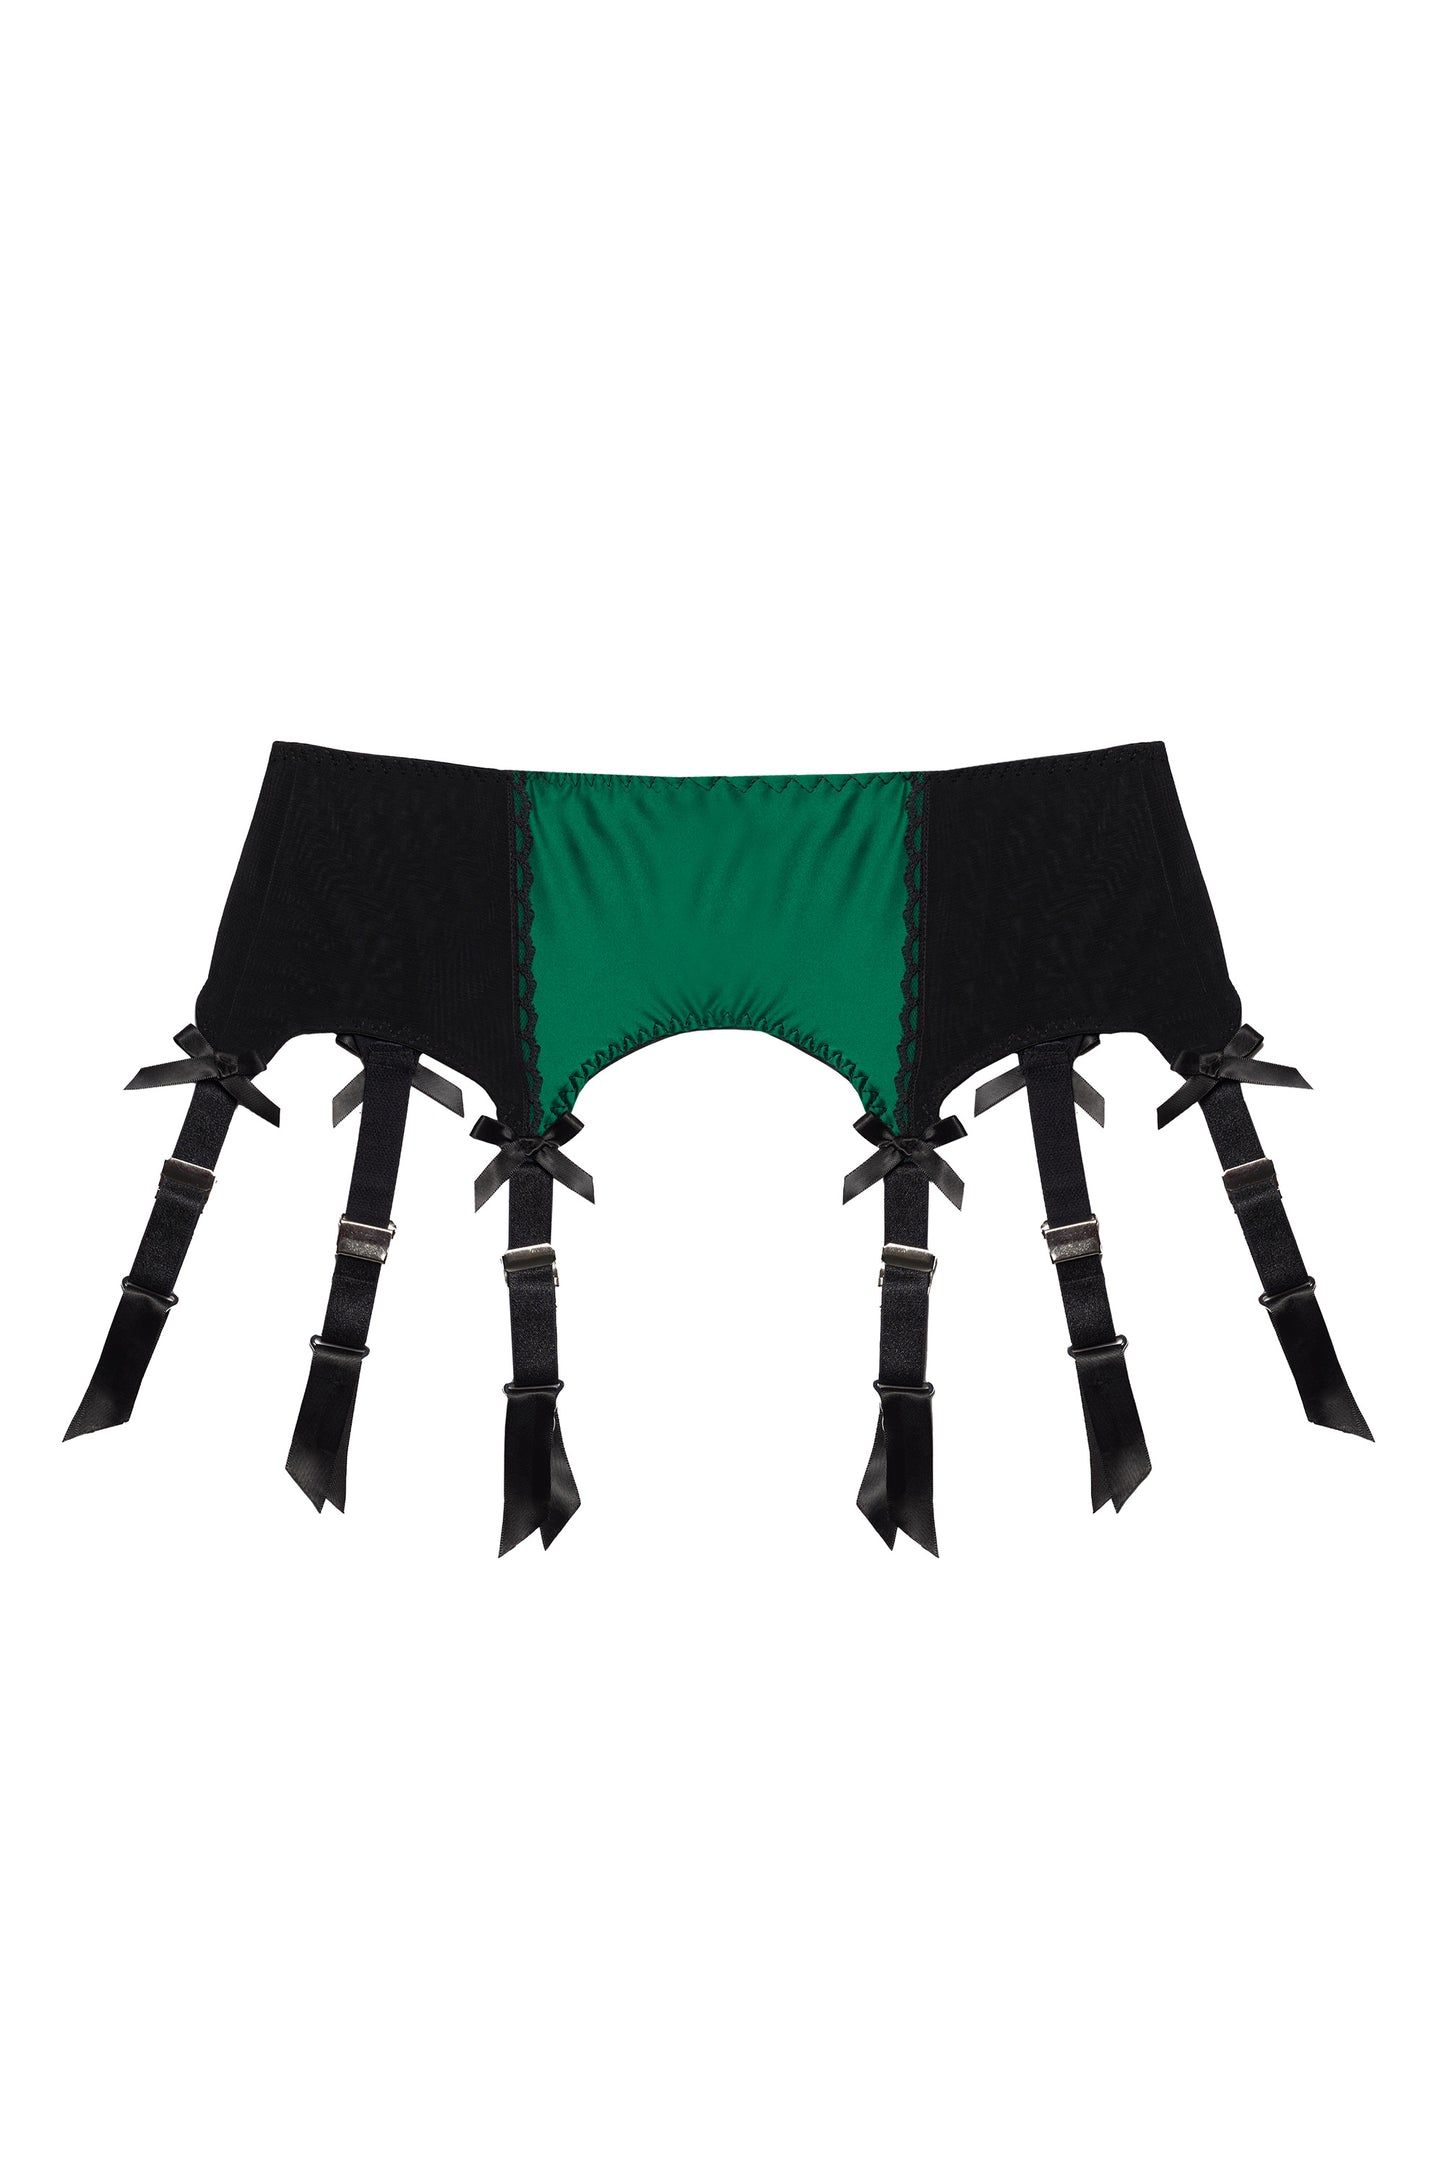 Diana Six Strap Suspender/Garter Belt By Kiss Me Deadly X PP - sizes 10-16